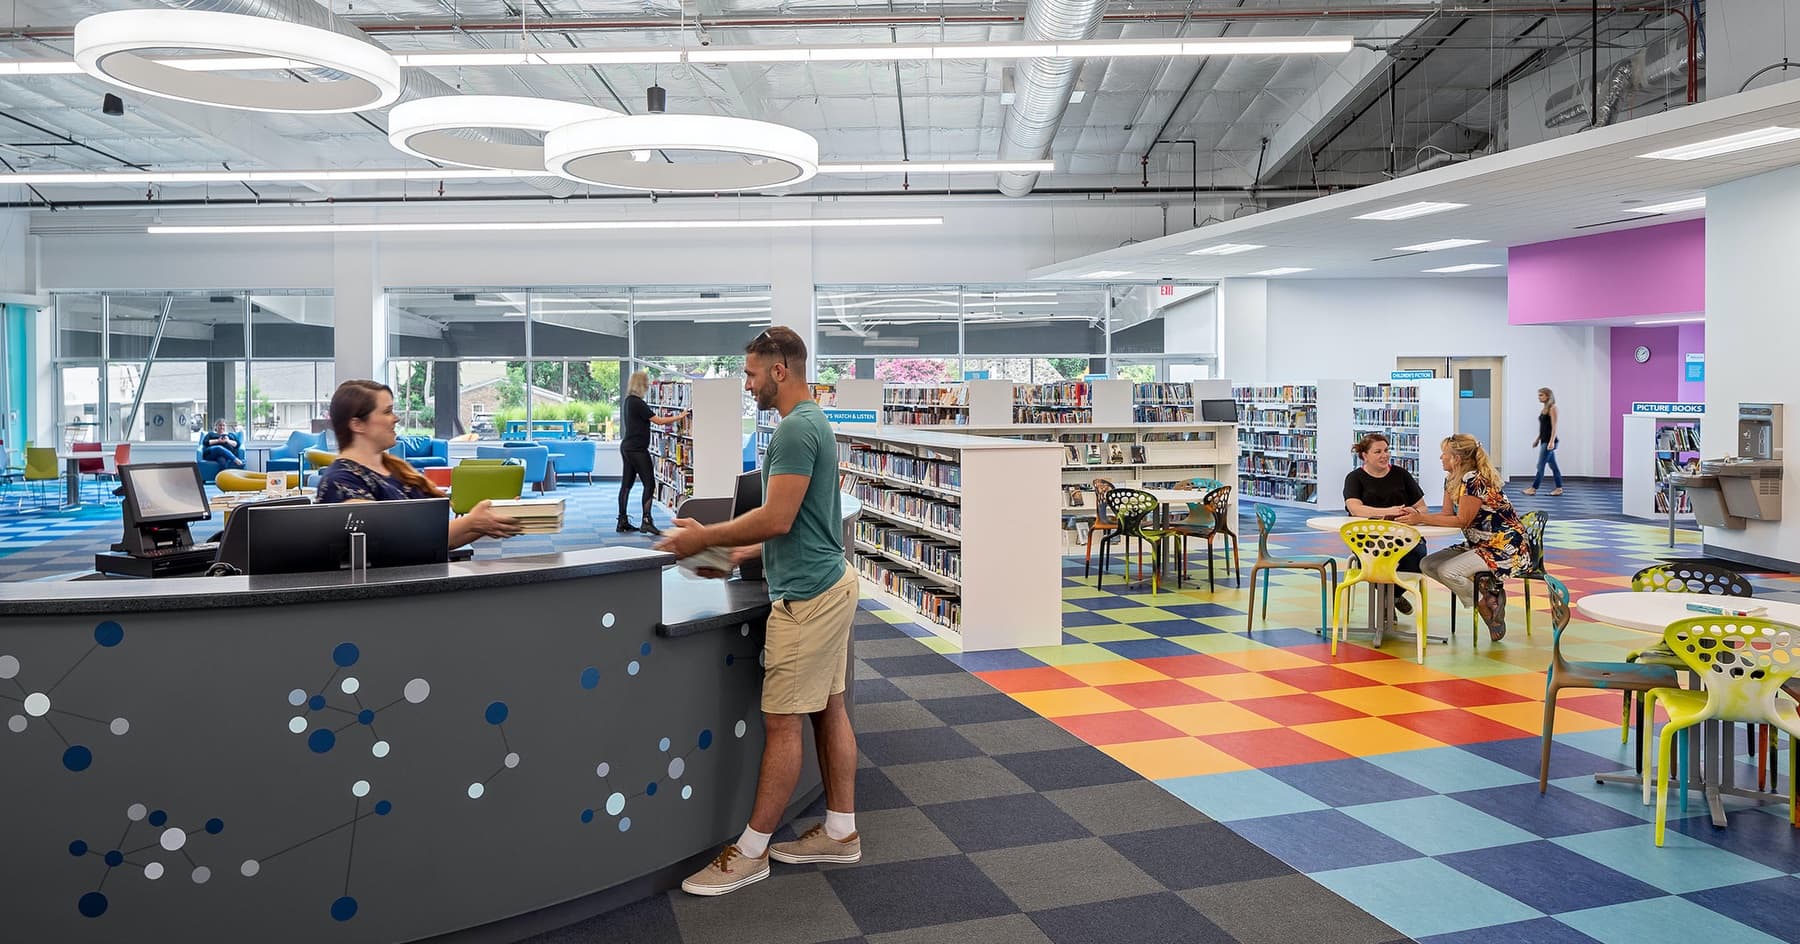 Boudreaux architects in Columbia, SC transformed an industrial building into a colorful open concept library